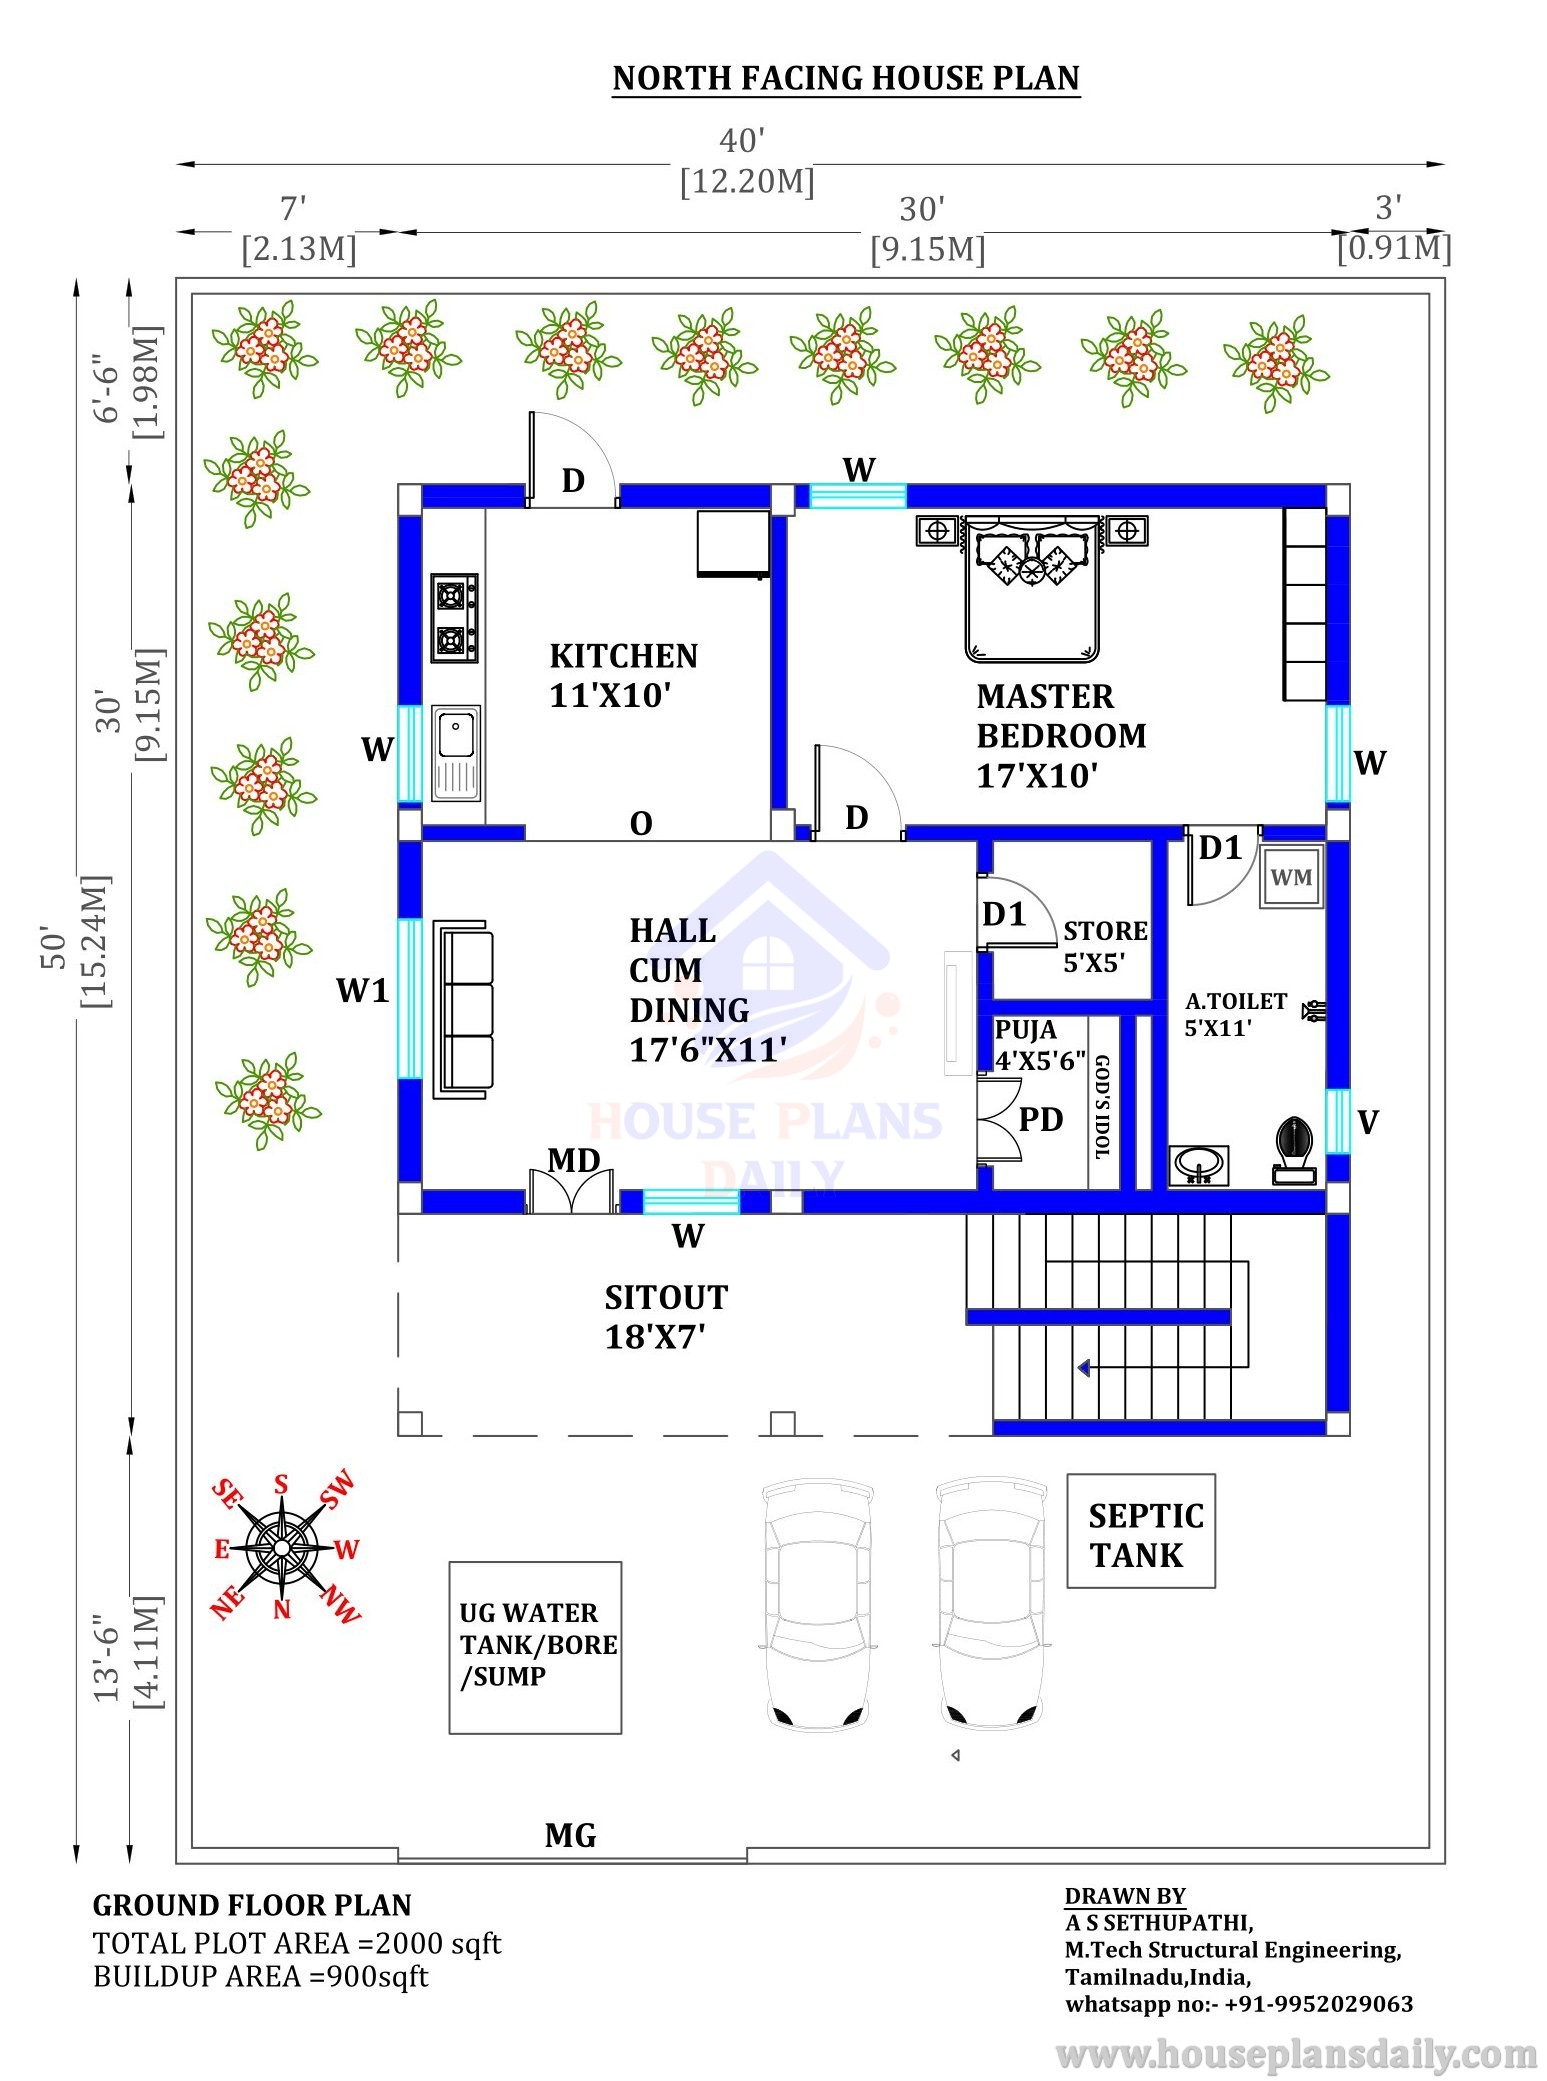 Vastu for Home North Facing | House Design with Car Parking